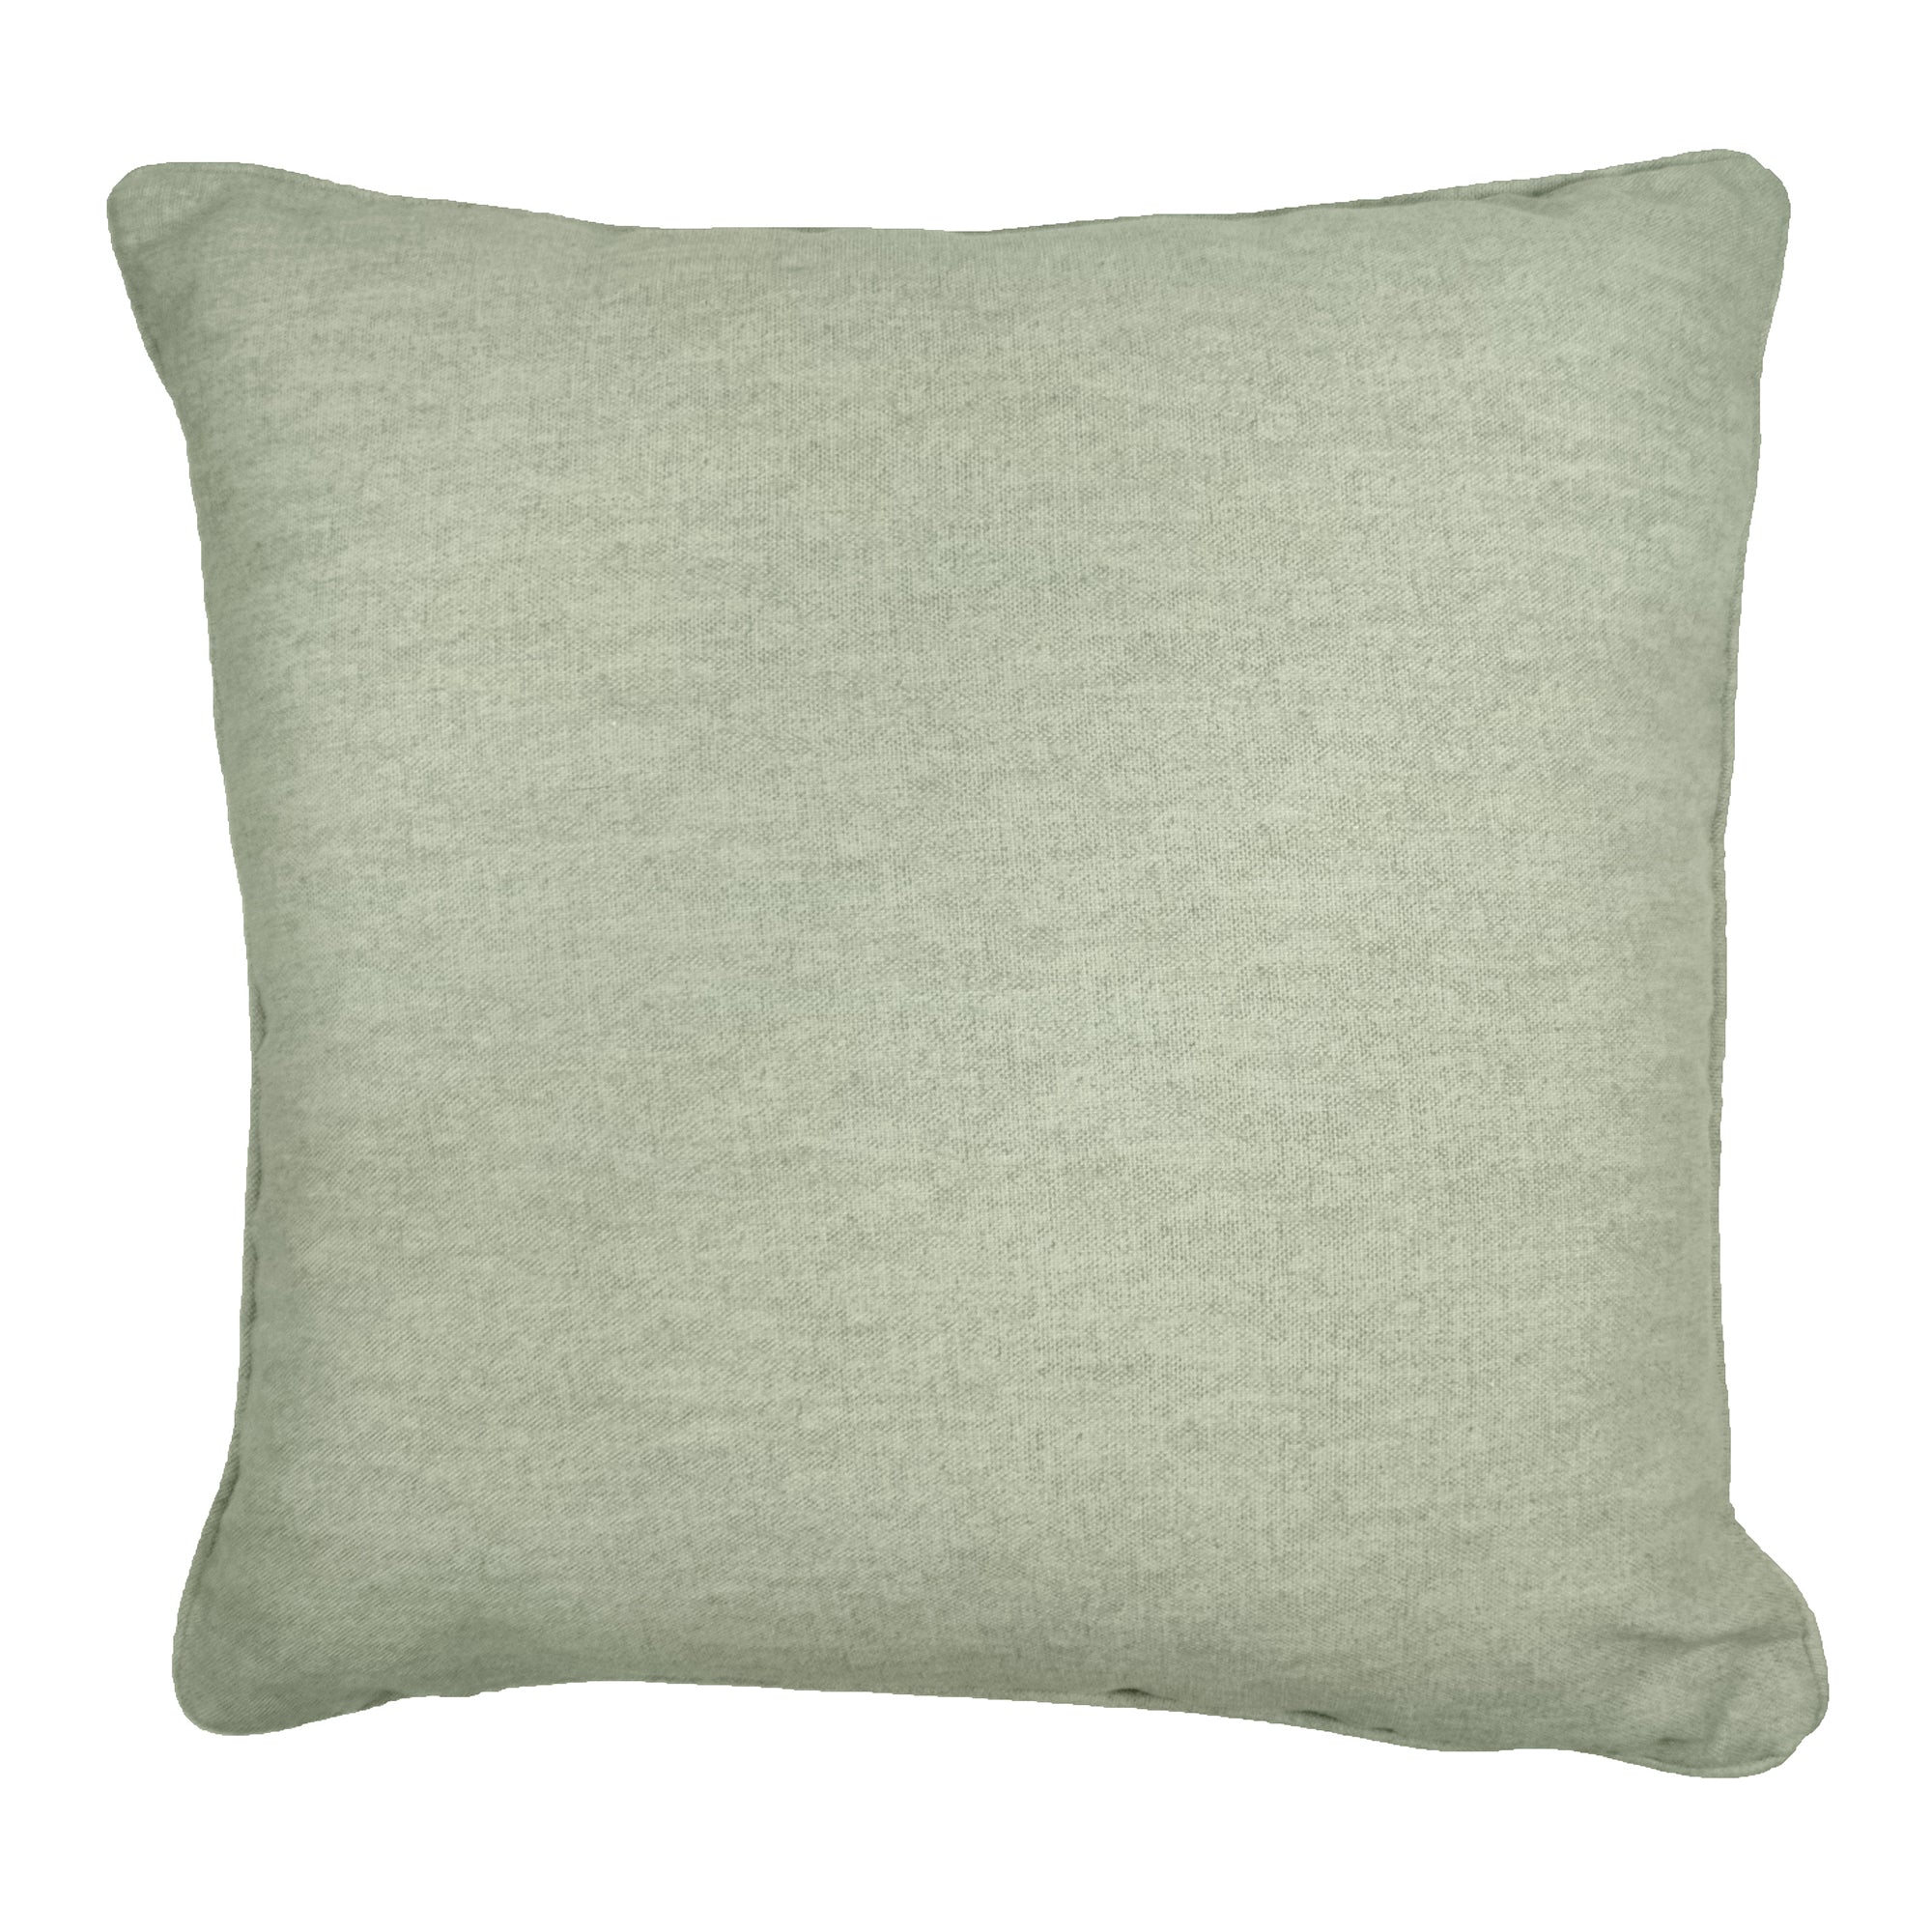 Sorbonne - 100% Cotton Filled Cushion in Green - by Fusion